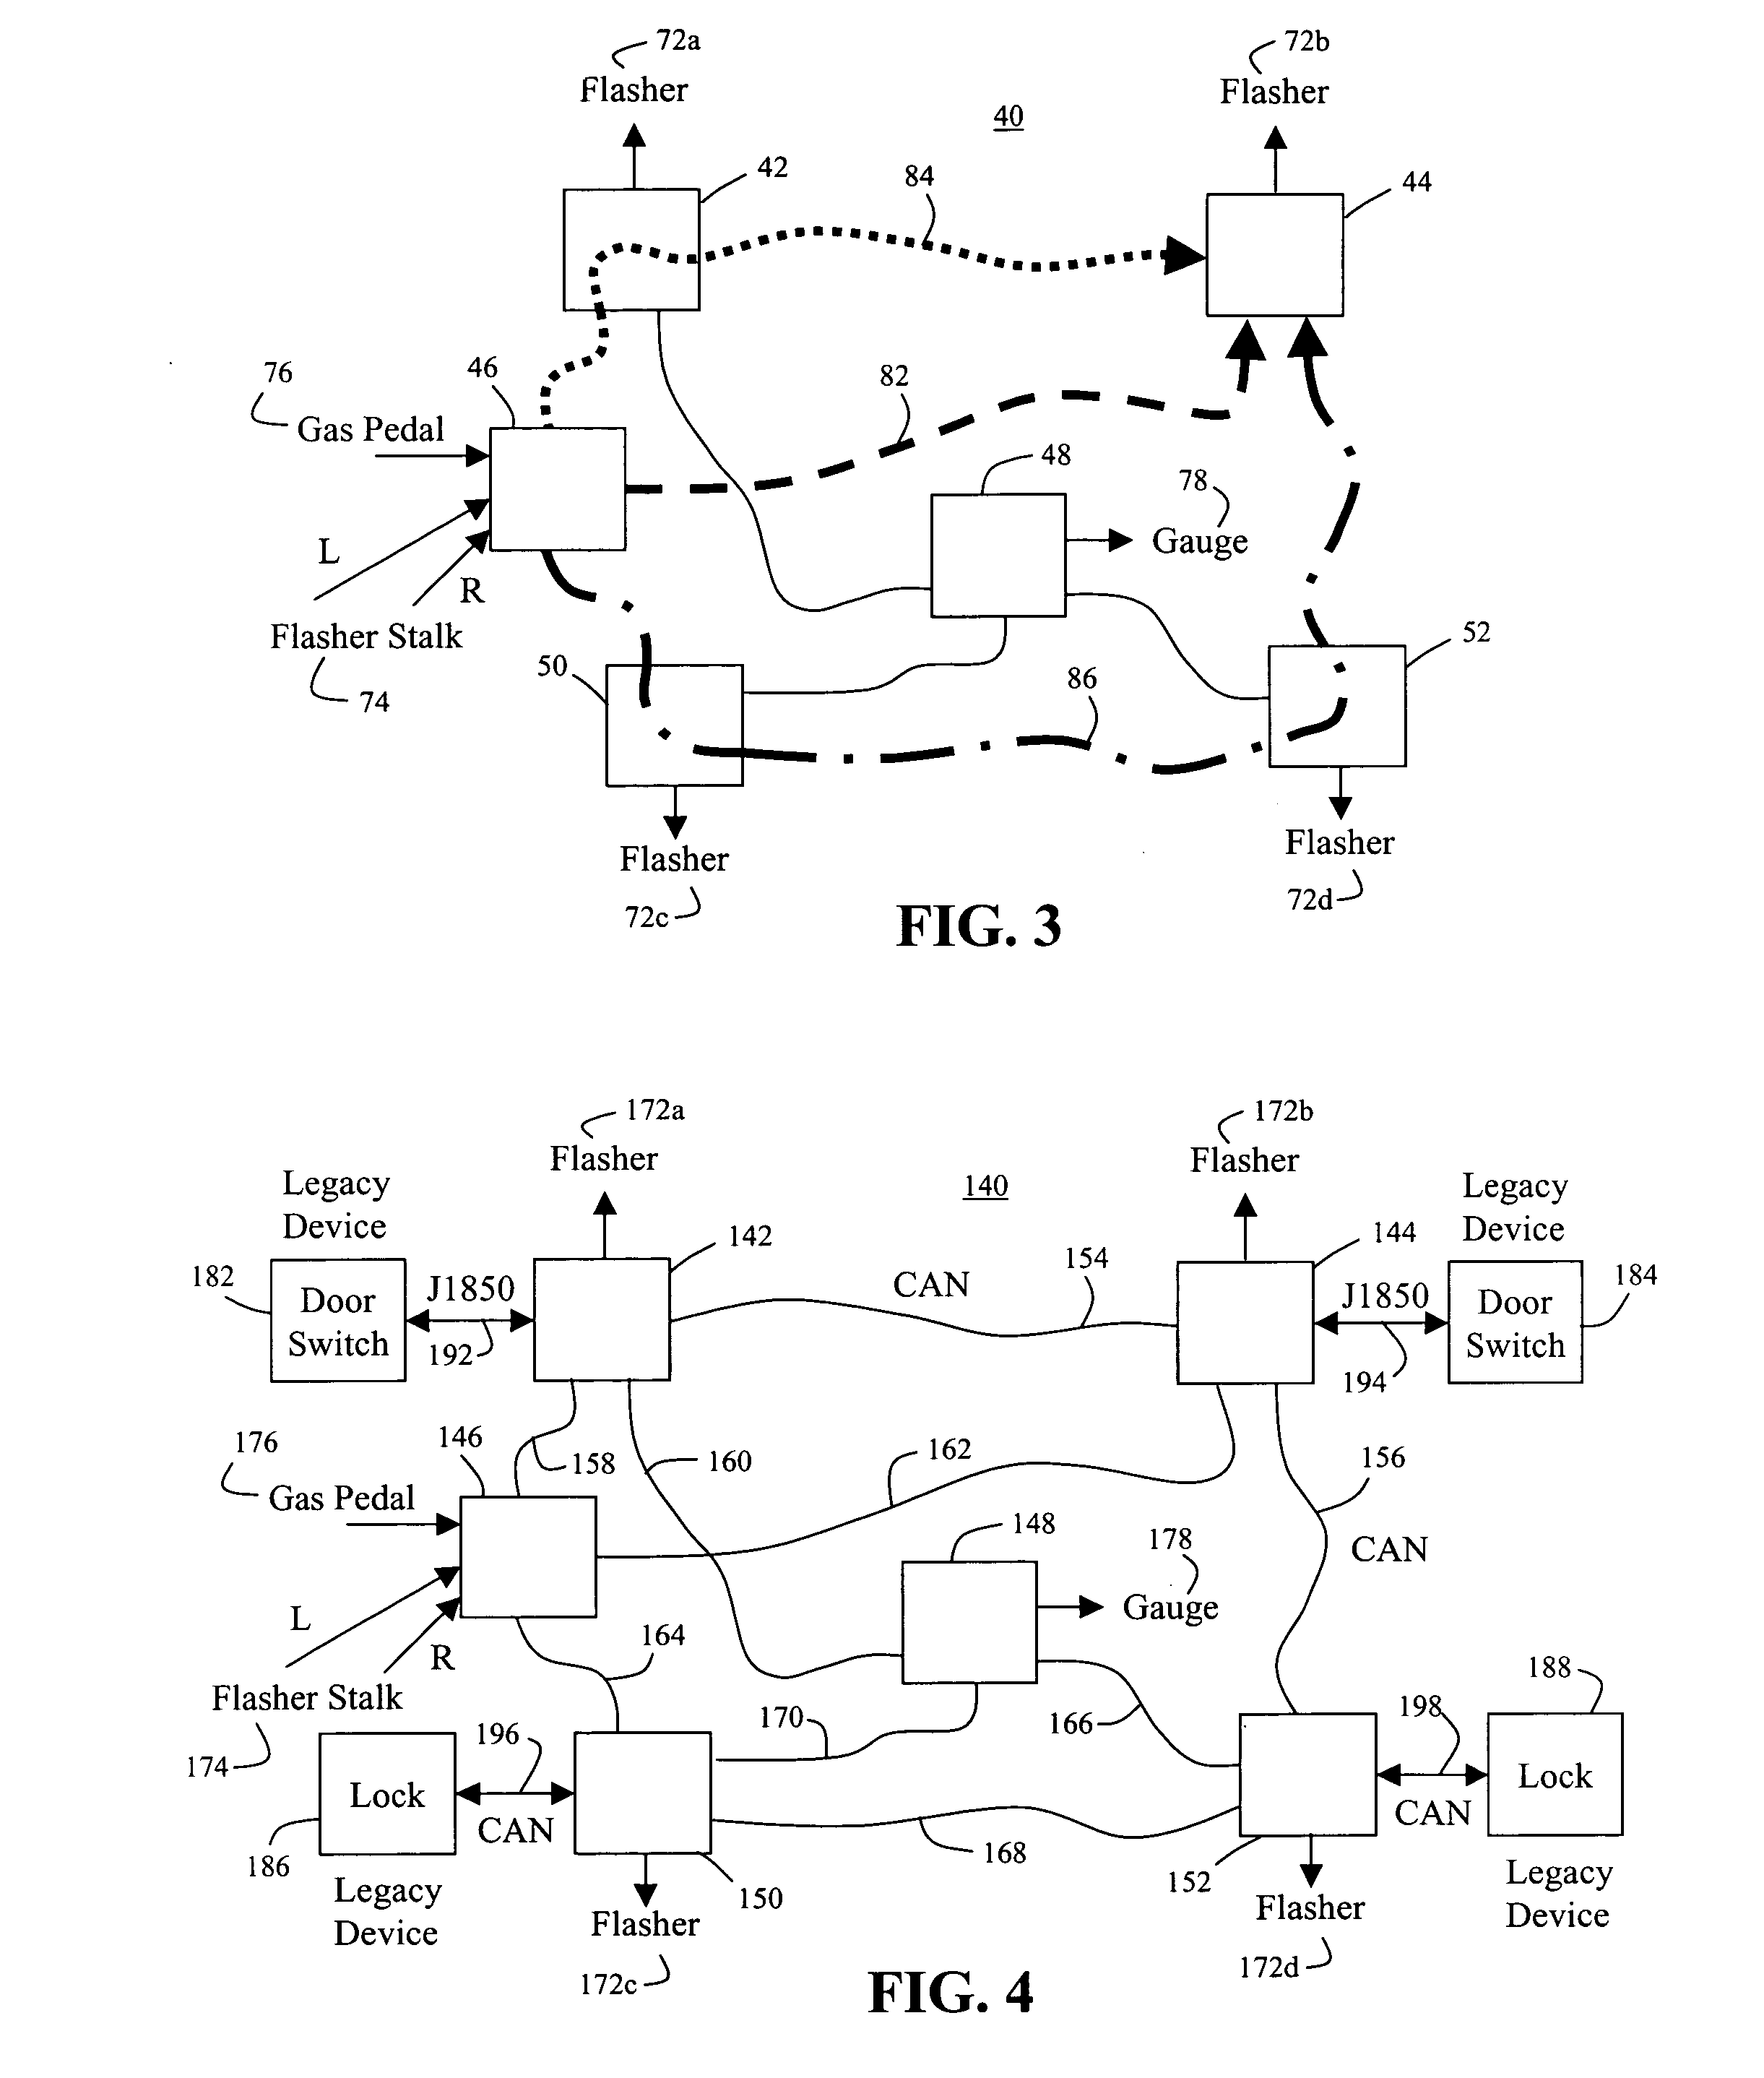 Vehicle network with time slotted access and method